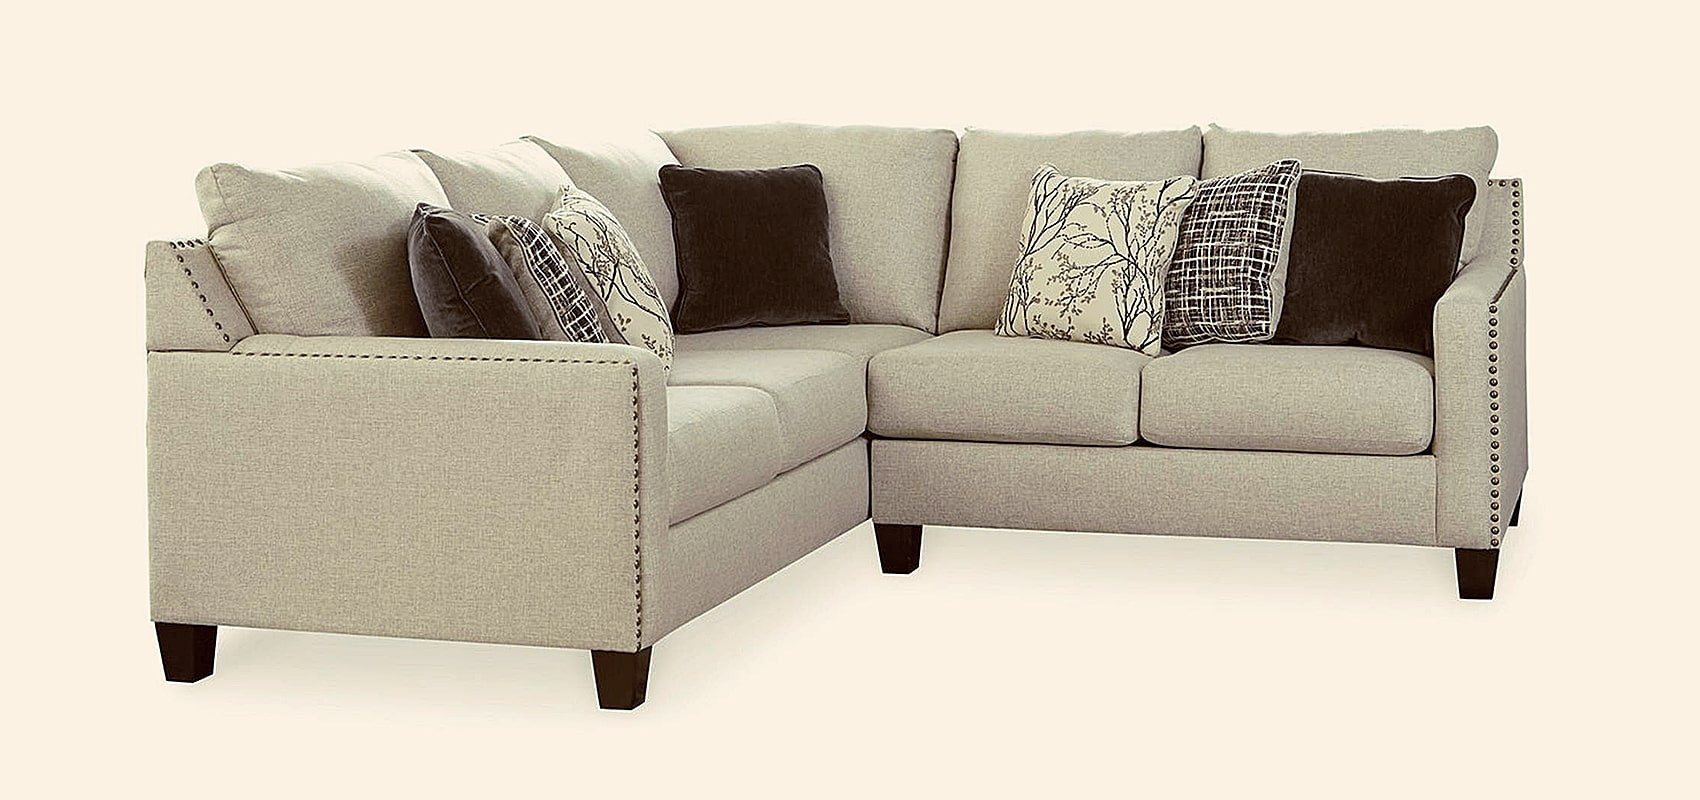 Two Piece Sectional or Small Sectional Sofa